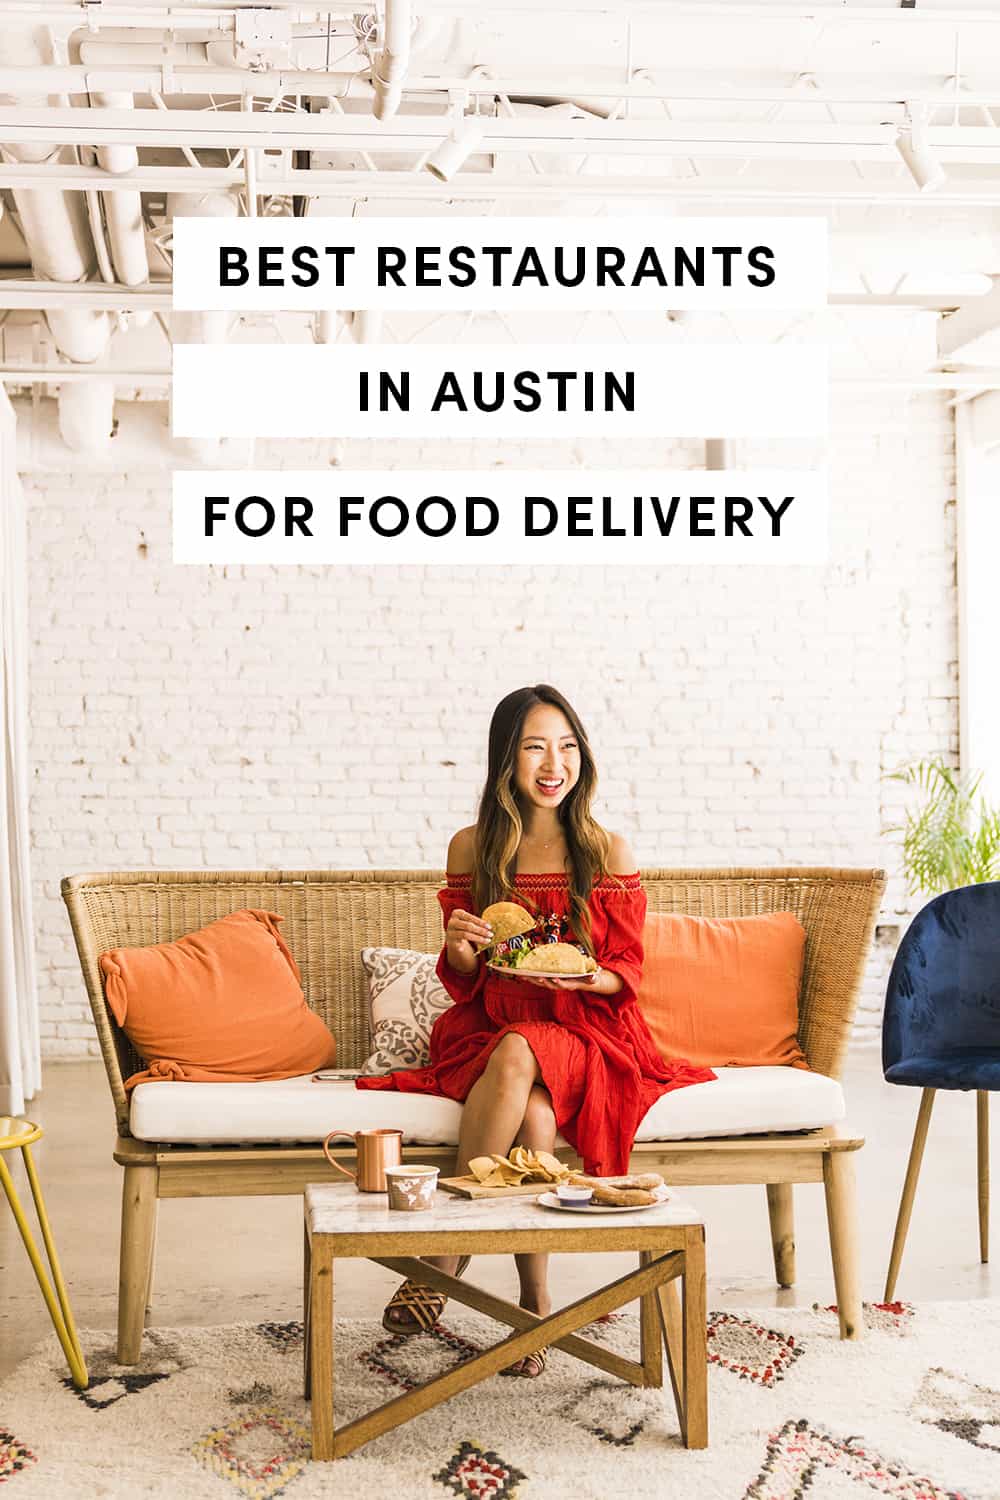 9 Best Restaurants For Food Delivery In Austin